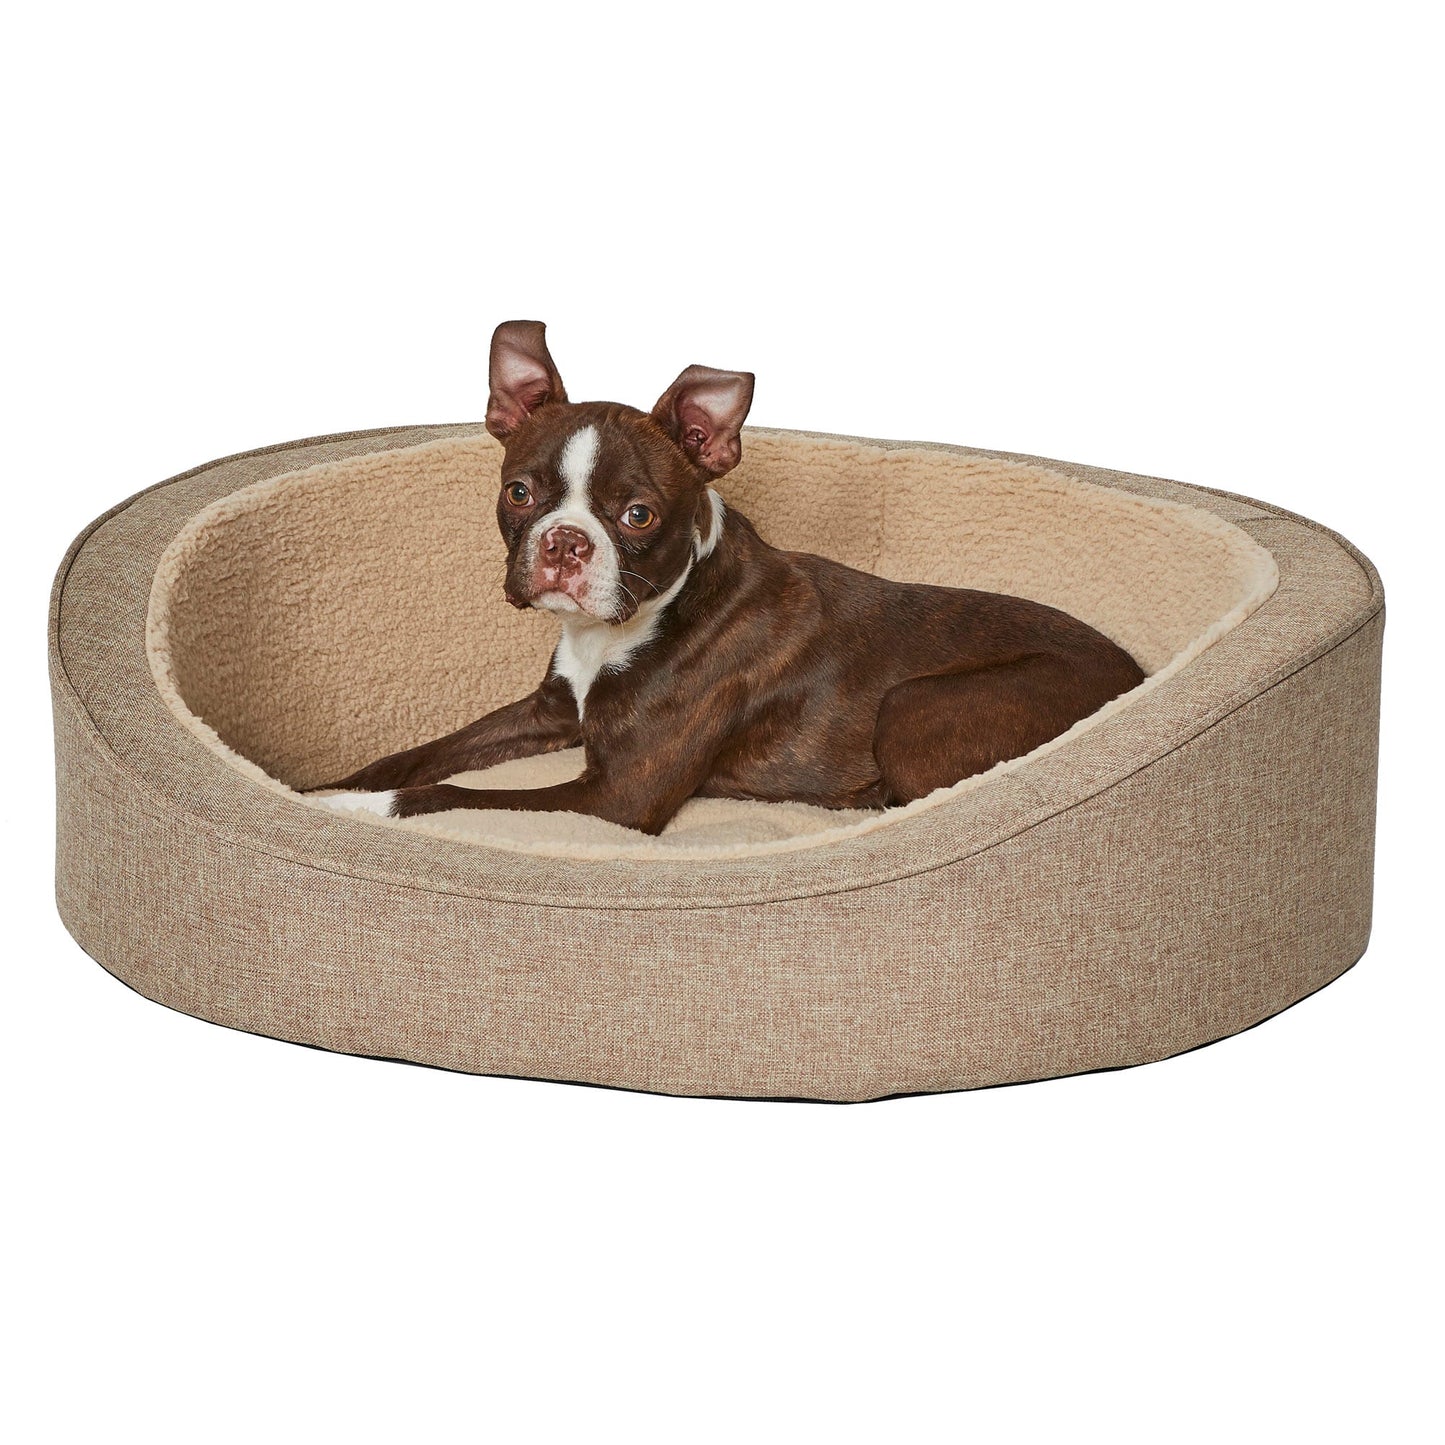 MidWest Homes for Pets QuietTime Deluxe Hudson Pet Bed  Tan  Small